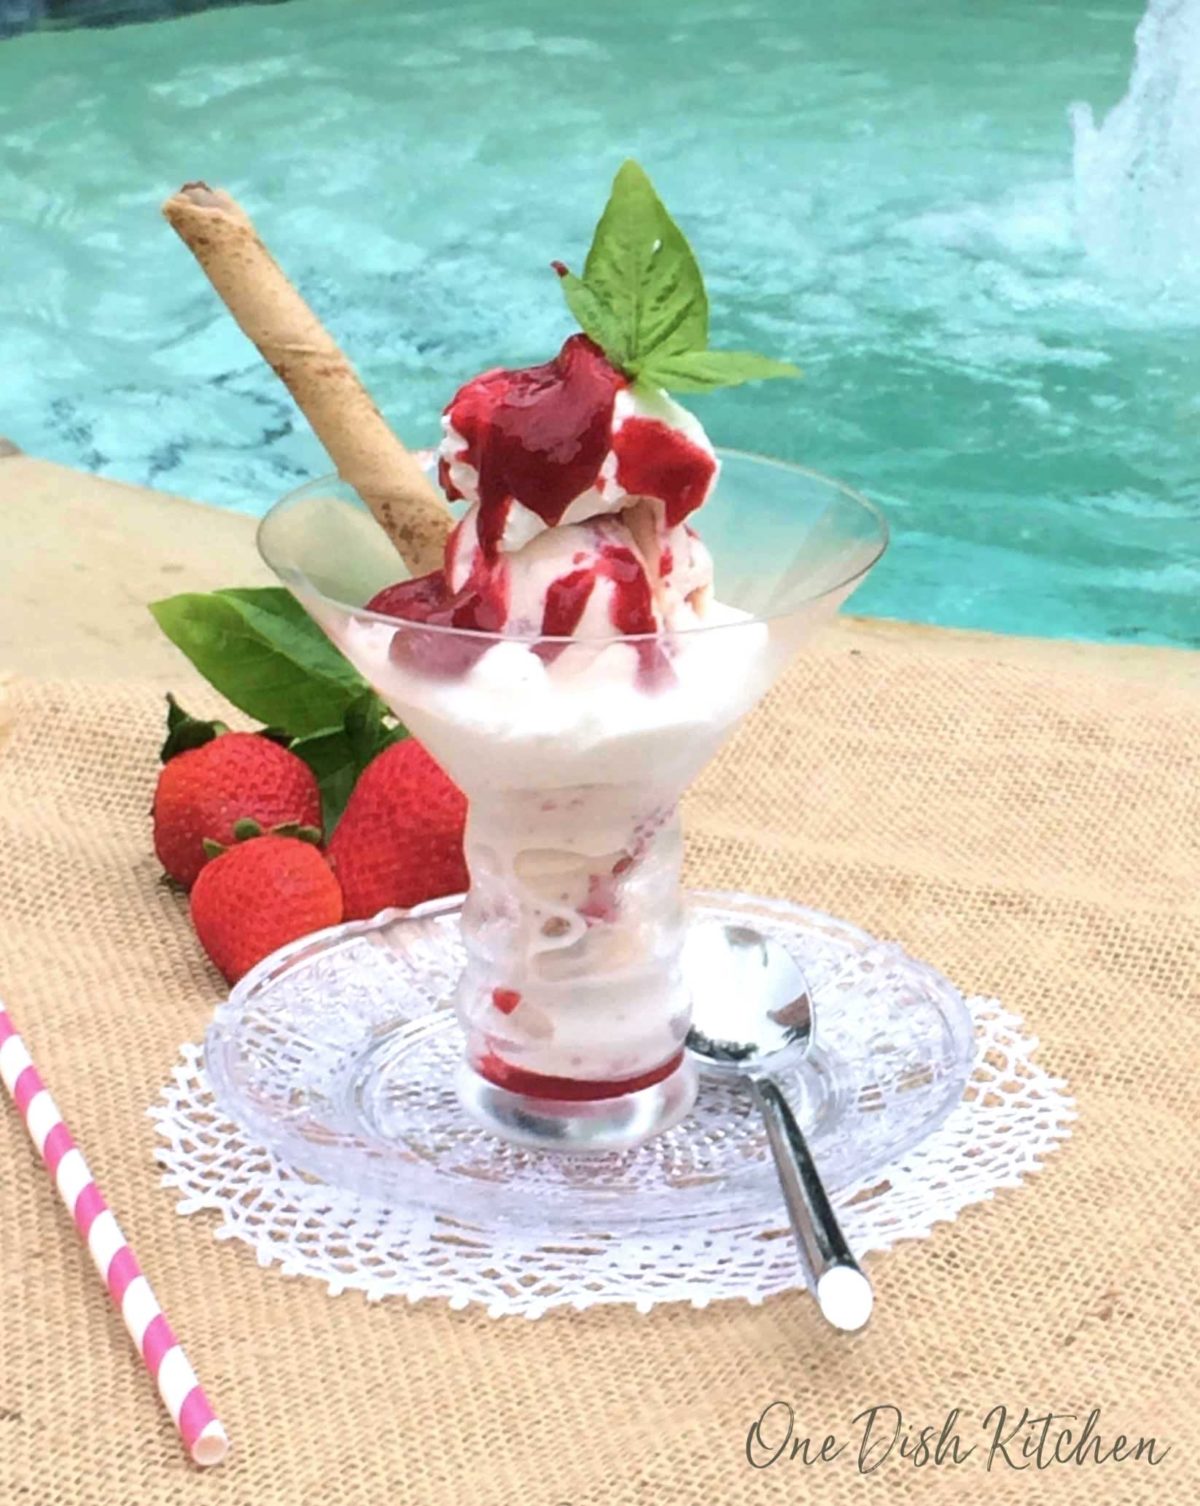 an ice cream sundae in a clear dish next to a swimming pool.